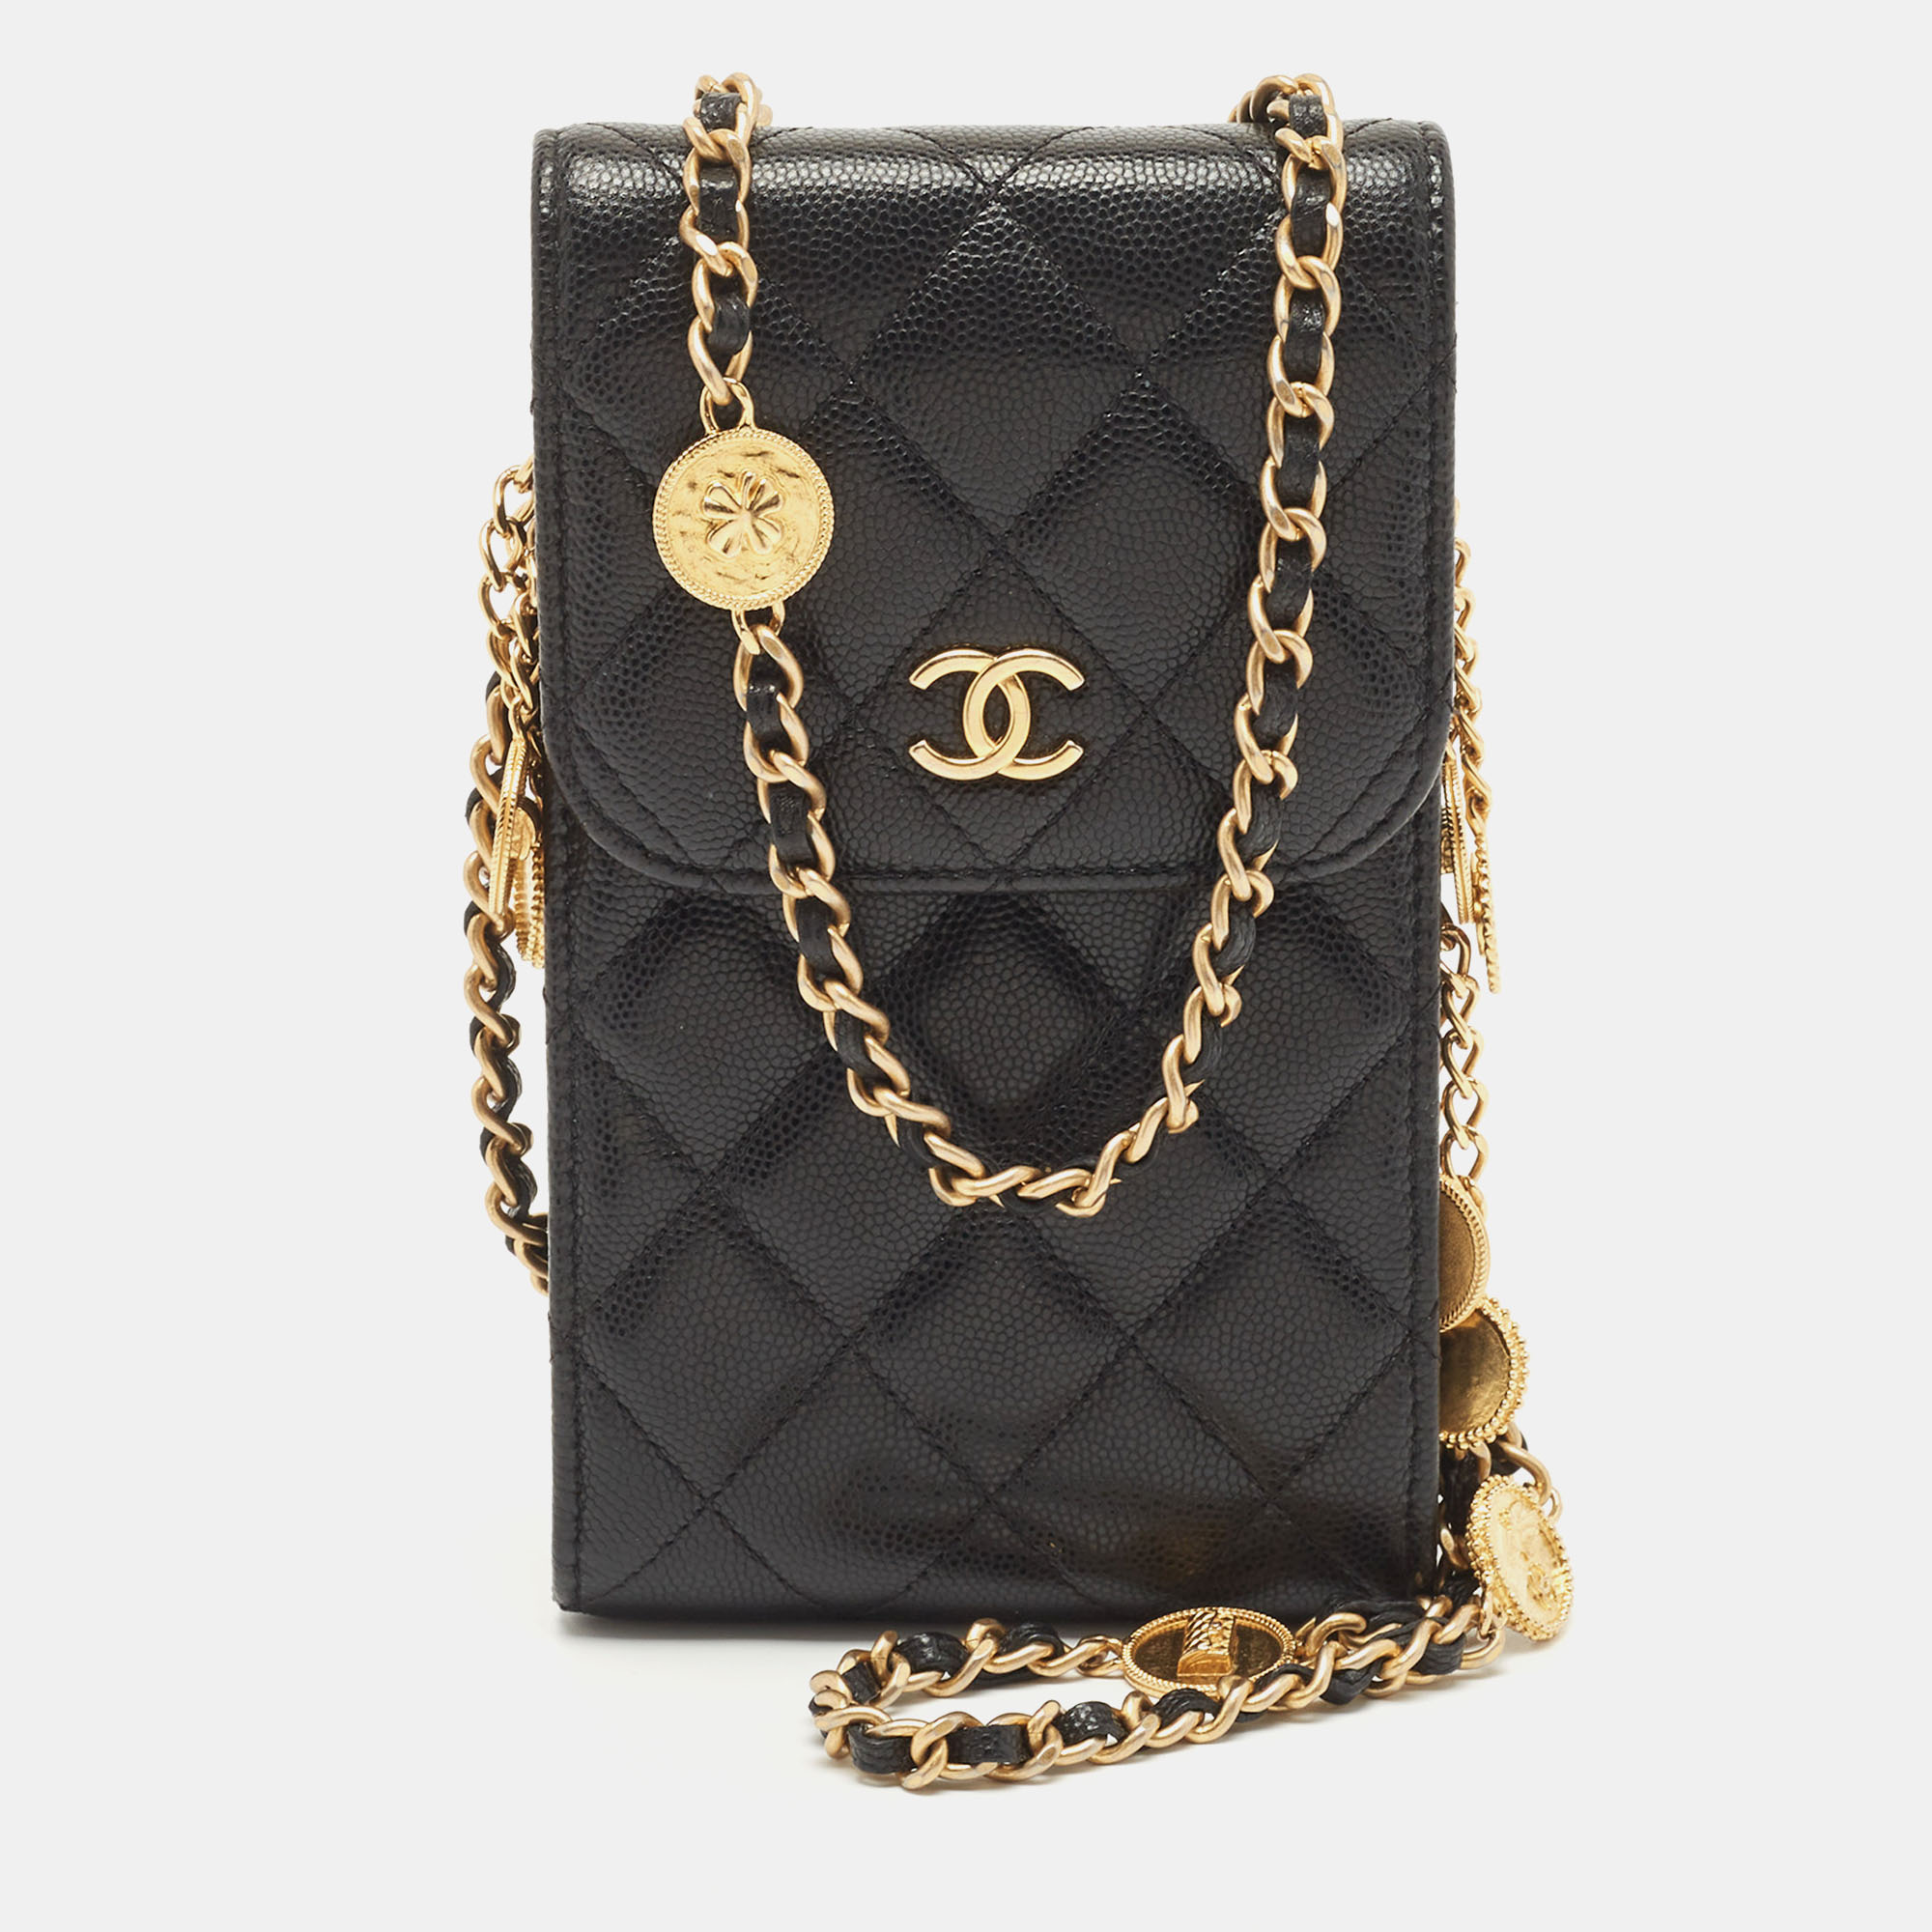 Chanel Black Quilted Caviar Leather CC Medallion Chain Phone Crossbody Bag